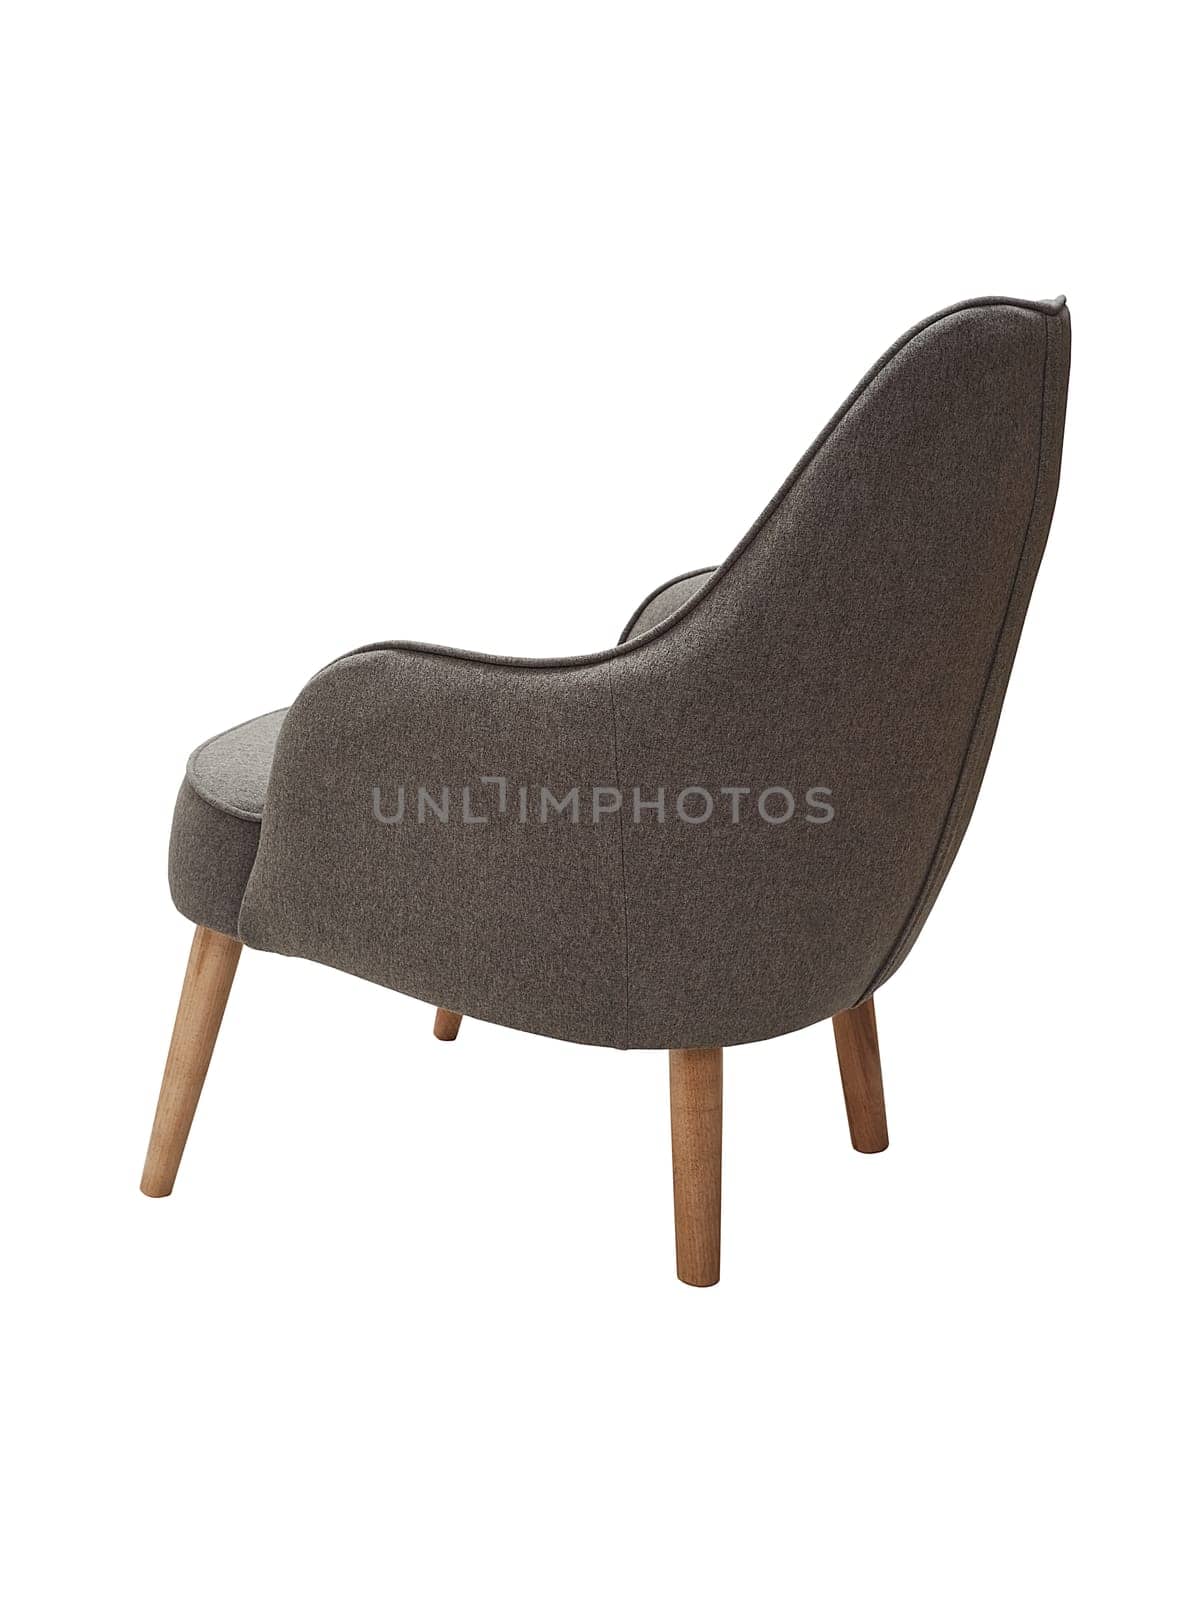 modern fabric grey armchair with wooden legs isolated on white background, back view.